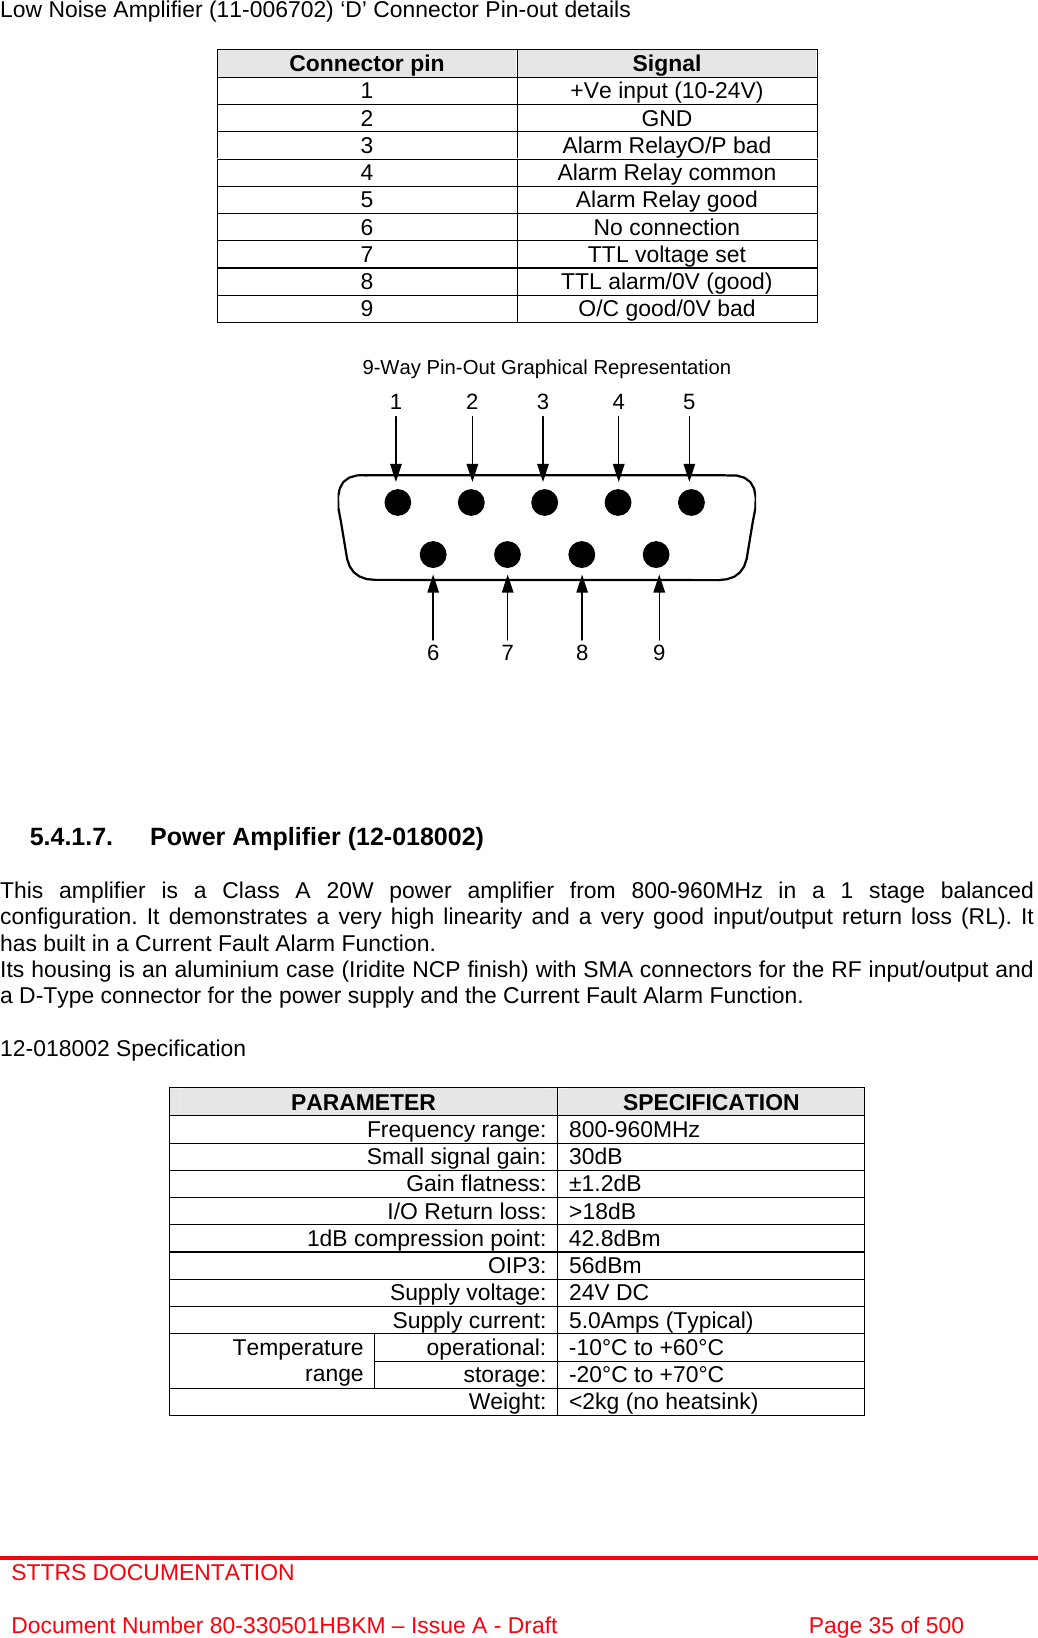 STTRS DOCUMENTATION  Document Number 80-330501HBKM – Issue A - Draft  Page 35 of 500  7 8 961 2 3 4 59-Way Pin-Out Graphical Representation Low Noise Amplifier (11-006702) ‘D’ Connector Pin-out details  Connector pin  Signal 1  +Ve input (10-24V) 2 GND 3  Alarm RelayO/P bad 4  Alarm Relay common 5  Alarm Relay good 6 No connection 7  TTL voltage set 8  TTL alarm/0V (good) 9  O/C good/0V bad                    5.4.1.7.  Power Amplifier (12-018002)  This amplifier is a Class A 20W power amplifier from 800-960MHz in a 1 stage balanced configuration. It demonstrates a very high linearity and a very good input/output return loss (RL). It has built in a Current Fault Alarm Function. Its housing is an aluminium case (Iridite NCP finish) with SMA connectors for the RF input/output and a D-Type connector for the power supply and the Current Fault Alarm Function.  12-018002 Specification  PARAMETER  SPECIFICATION Frequency range: 800-960MHz Small signal gain: 30dB Gain flatness: ±1.2dB I/O Return loss: &gt;18dB 1dB compression point: 42.8dBm OIP3: 56dBm Supply voltage: 24V DC Supply current: 5.0Amps (Typical) operational: -10°C to +60°C Temperature range  storage: -20°C to +70°C Weight: &lt;2kg (no heatsink)  